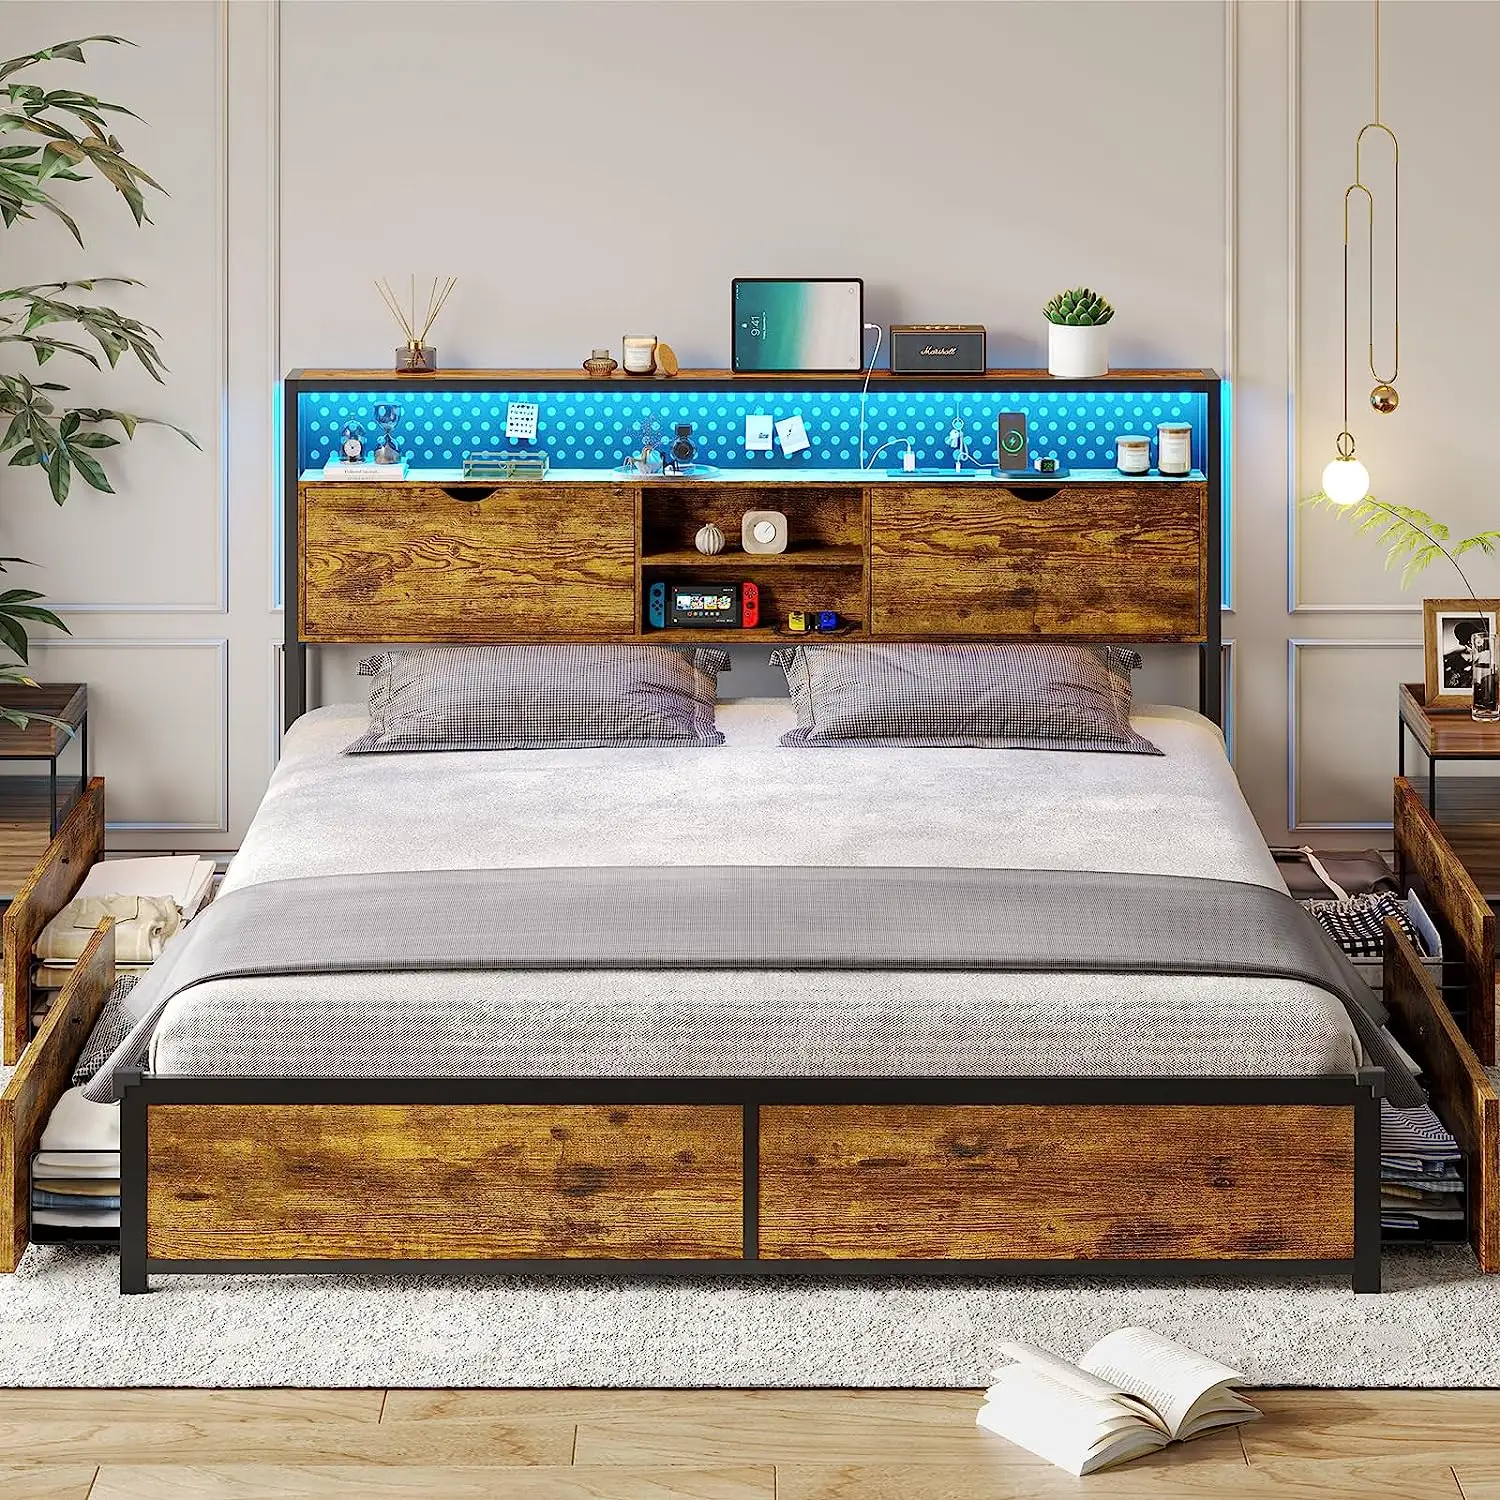 Queen LED Bed Frame with Storage Headboard, Queen Size Platform Bed with Charging Station, Metal Bed Frame with 4 Drawers,